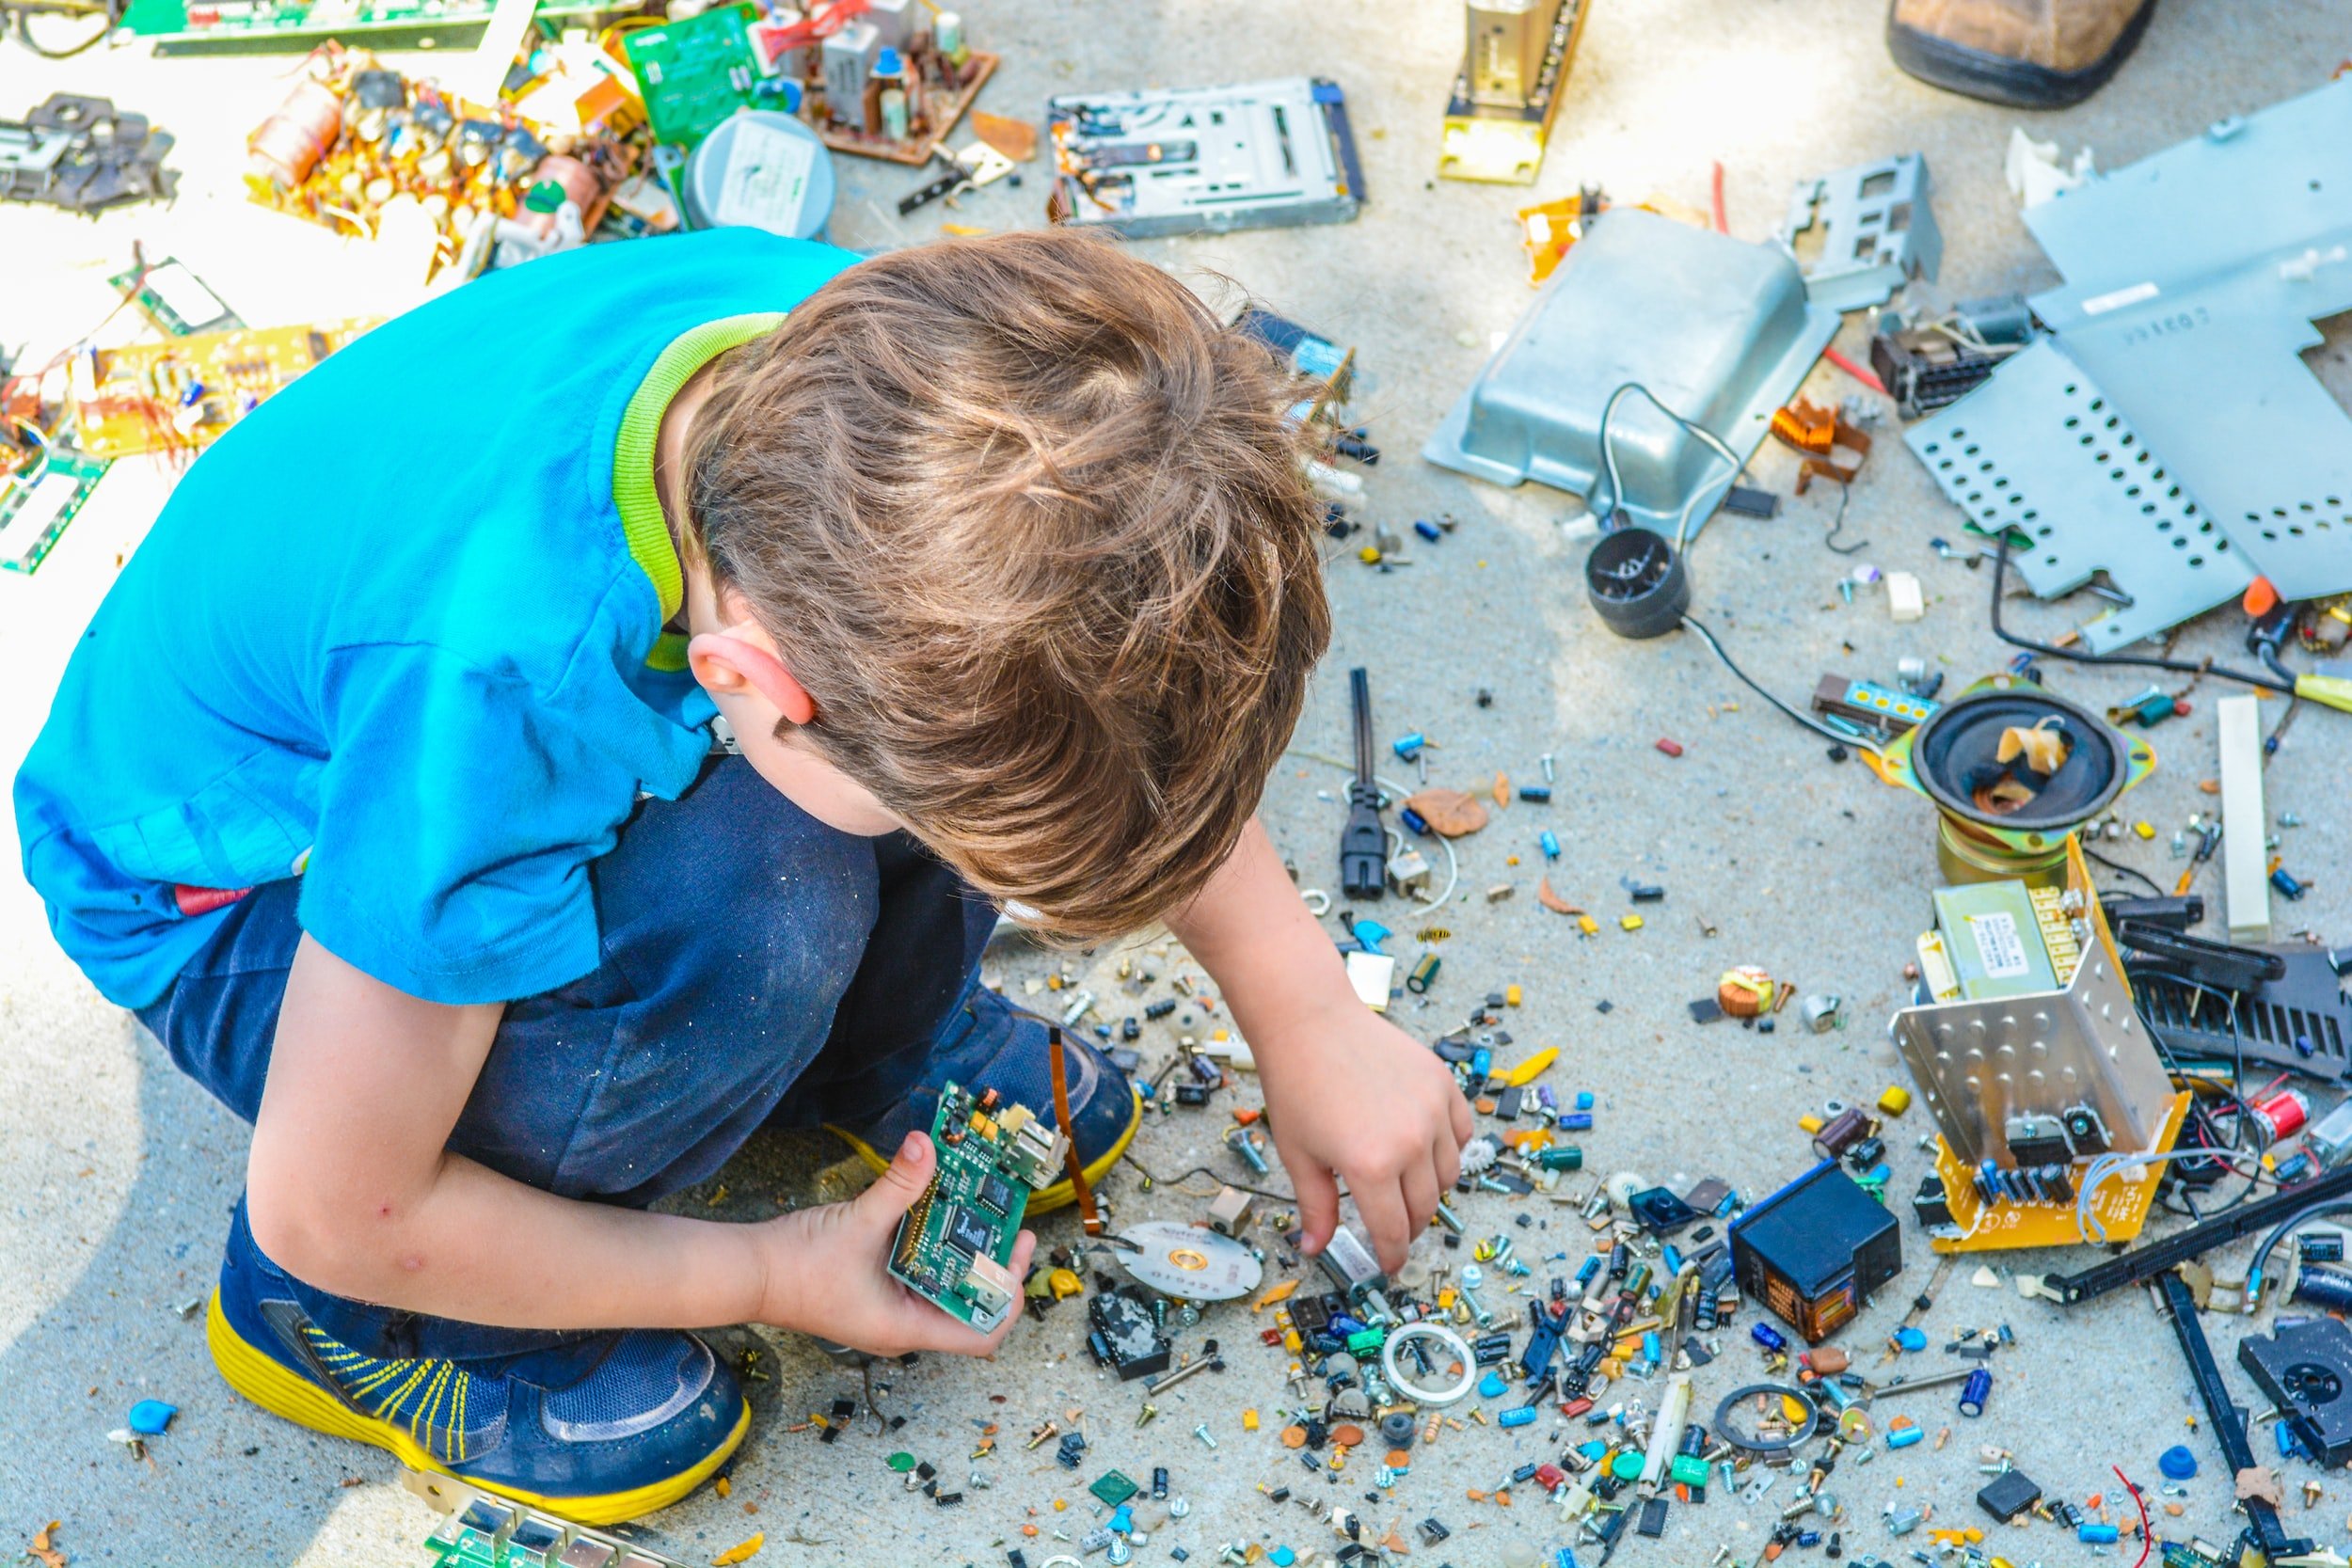 How Do You Teach Kids to Reduce, Reuse & Recycle?